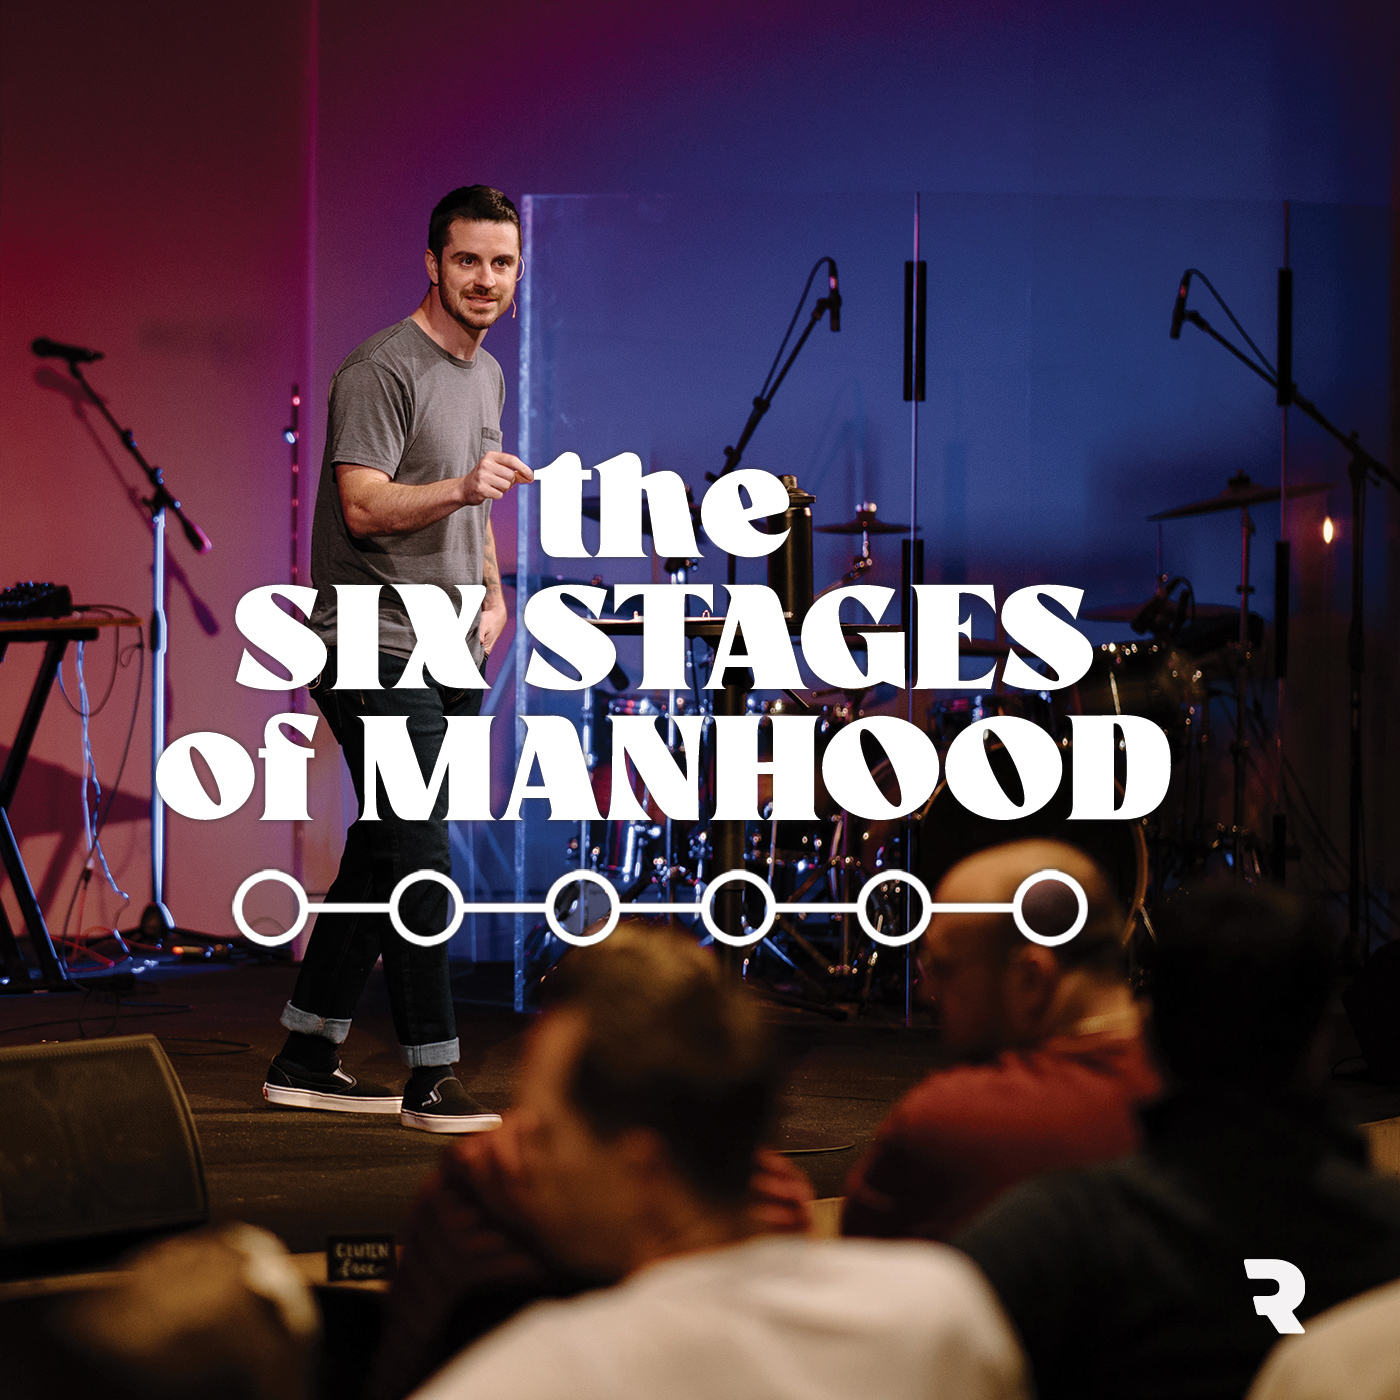 The Six Stages of Manhood